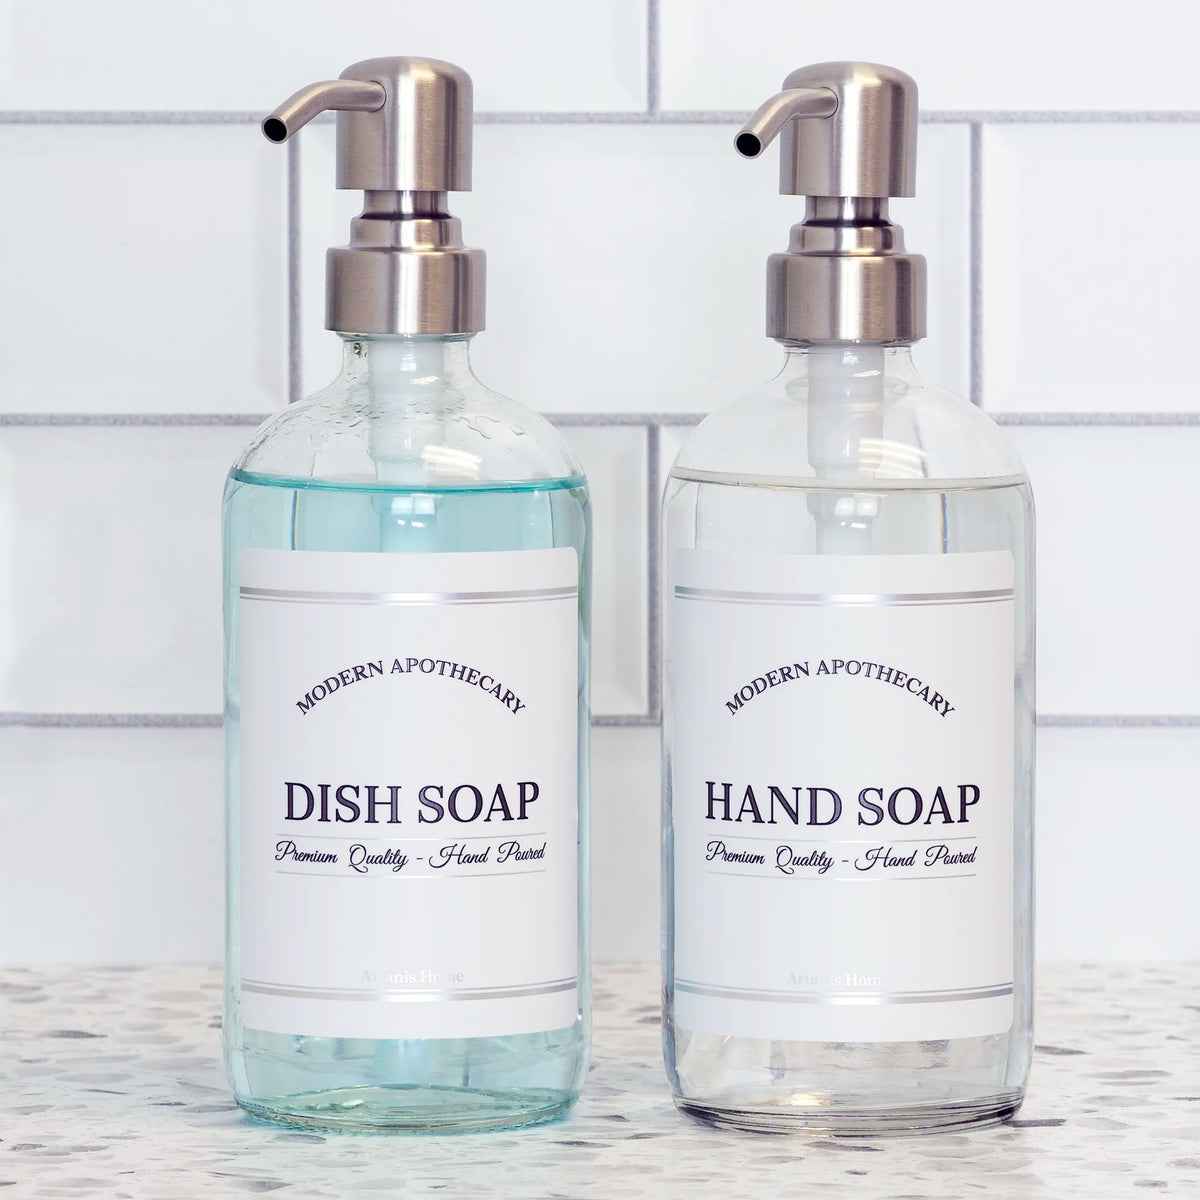 Clear glass hand soap dish soap set of soap dispensers with pretty labels and stainless steel pumps on a white tile kitchen renovation countertop. Labels are coordinated to declutter.